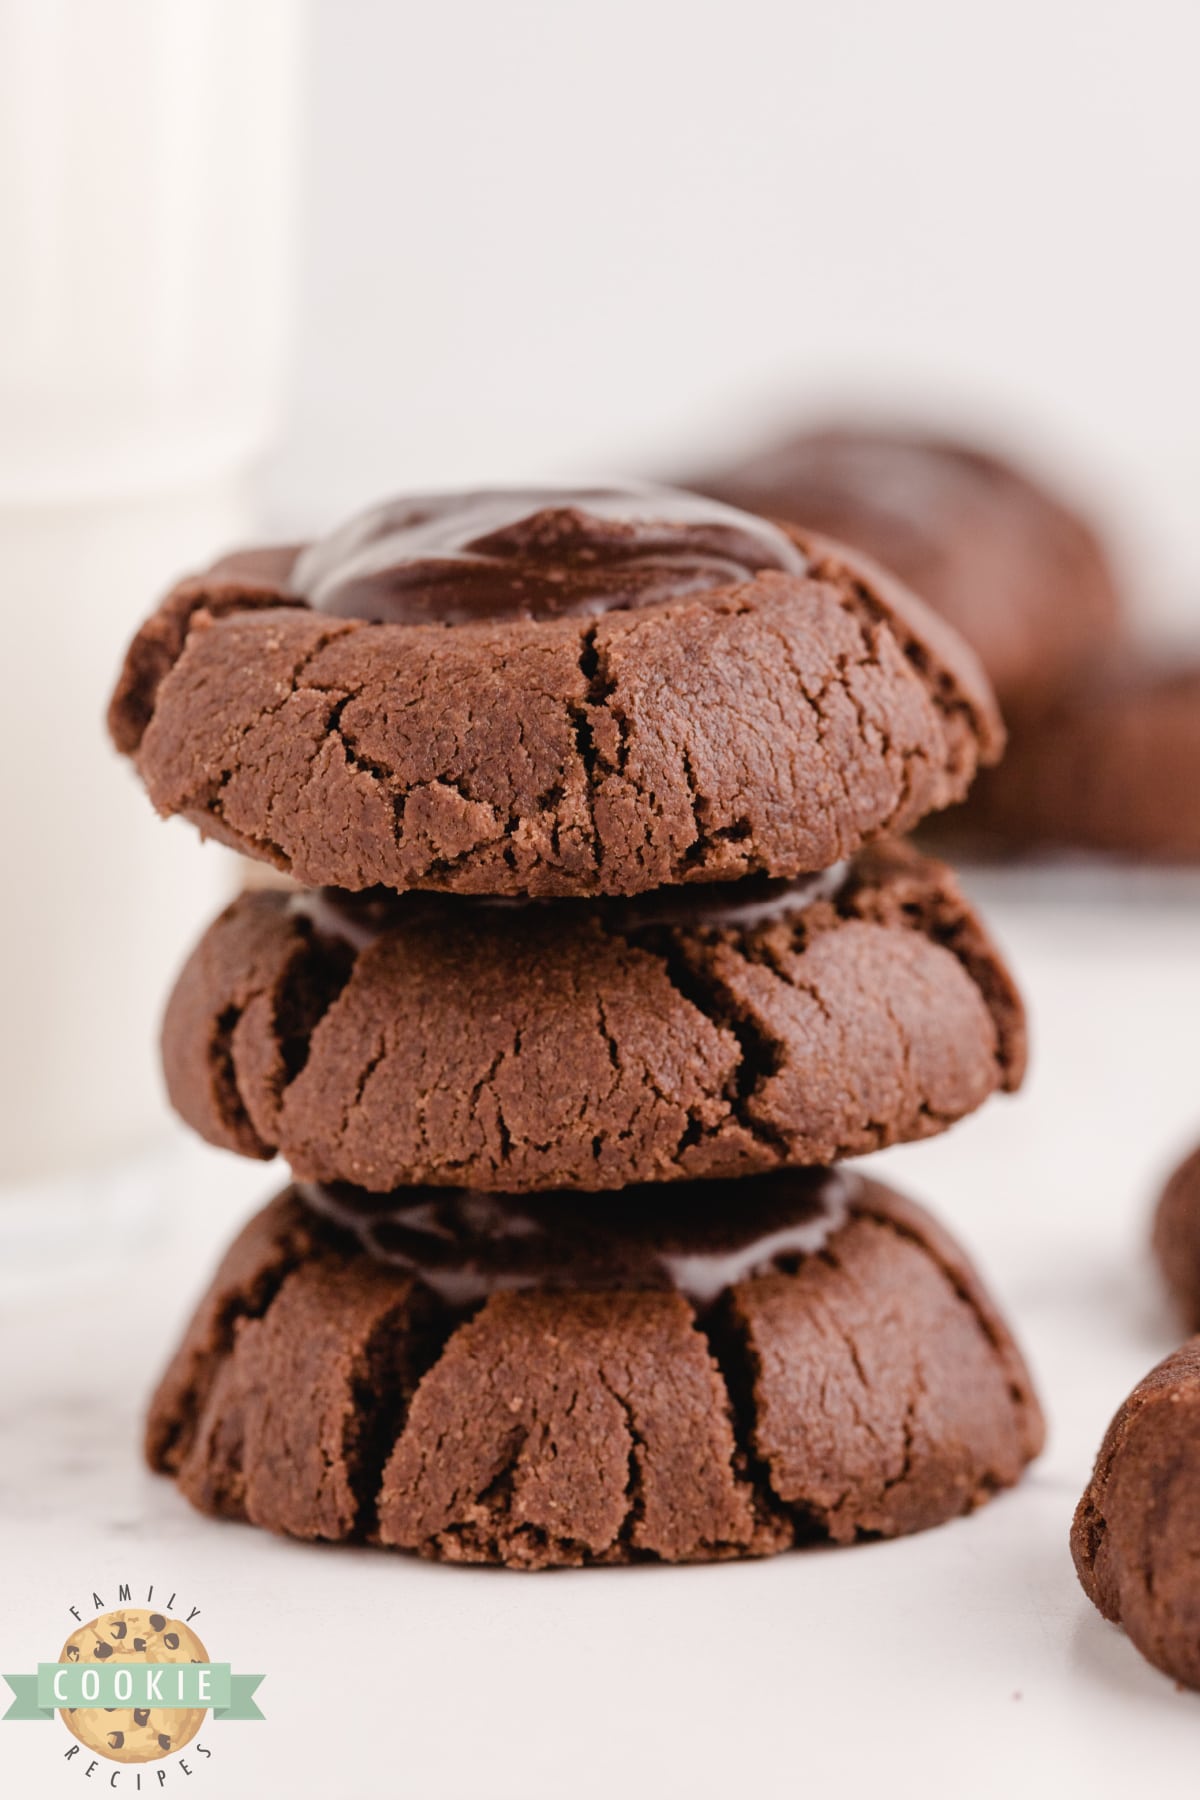 Chocolate cookies with chocolate ganache filling